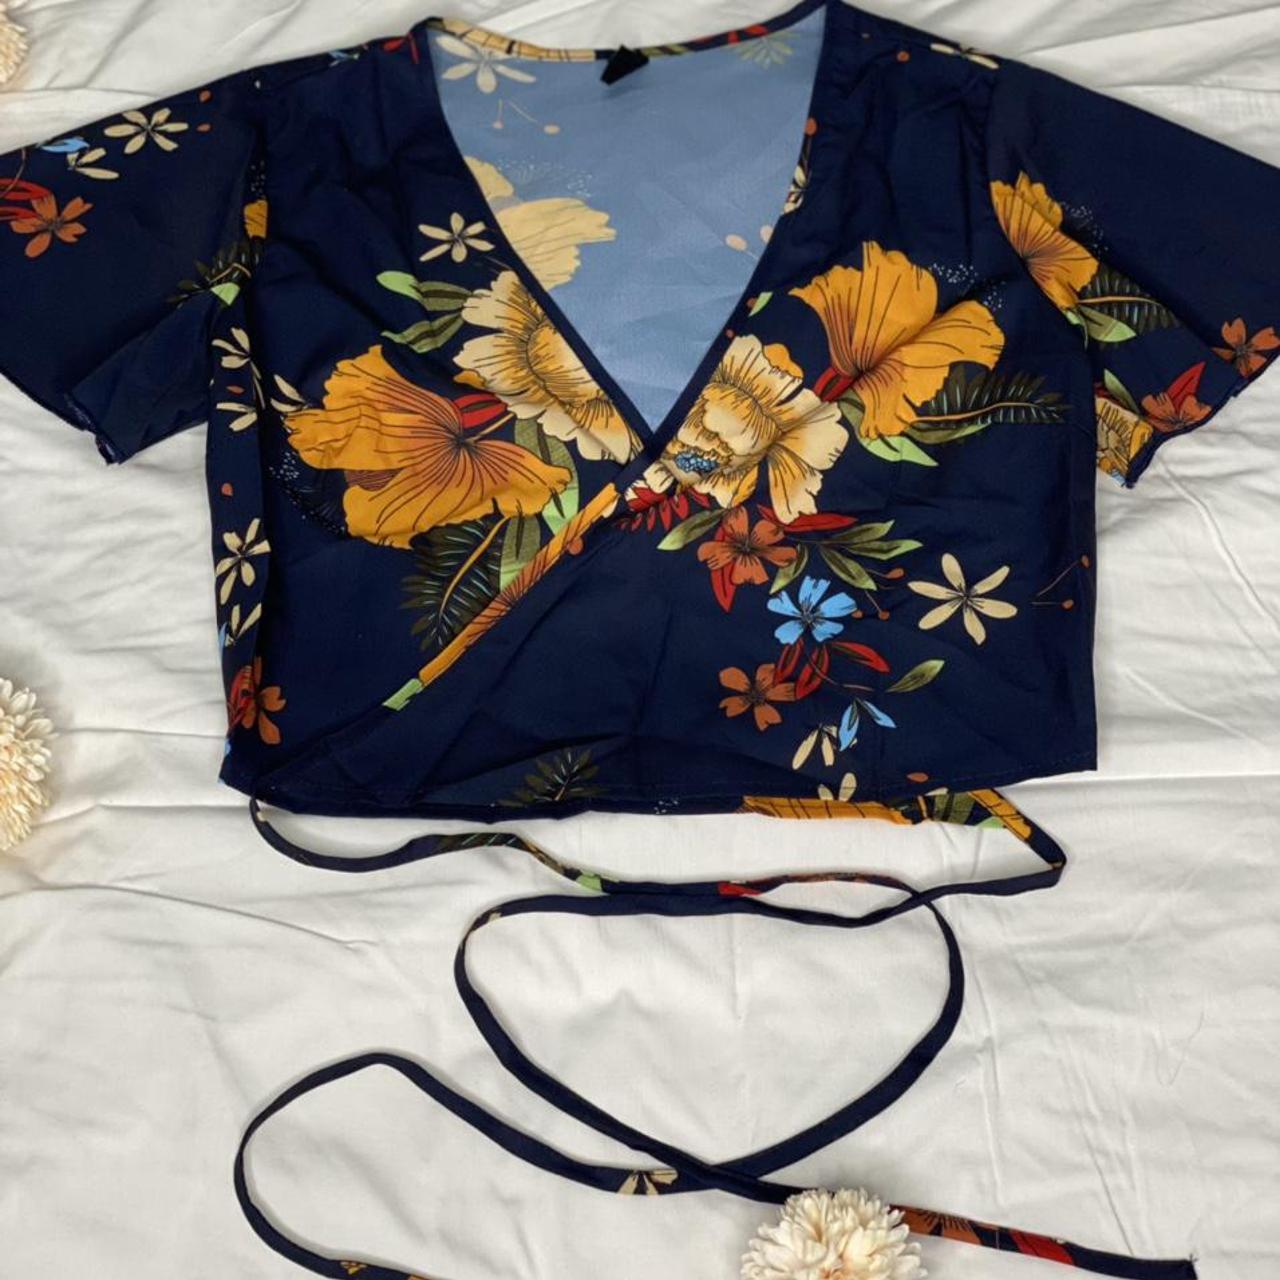 Product Image 1 - From SHEIN 
Never worn 
Excellent